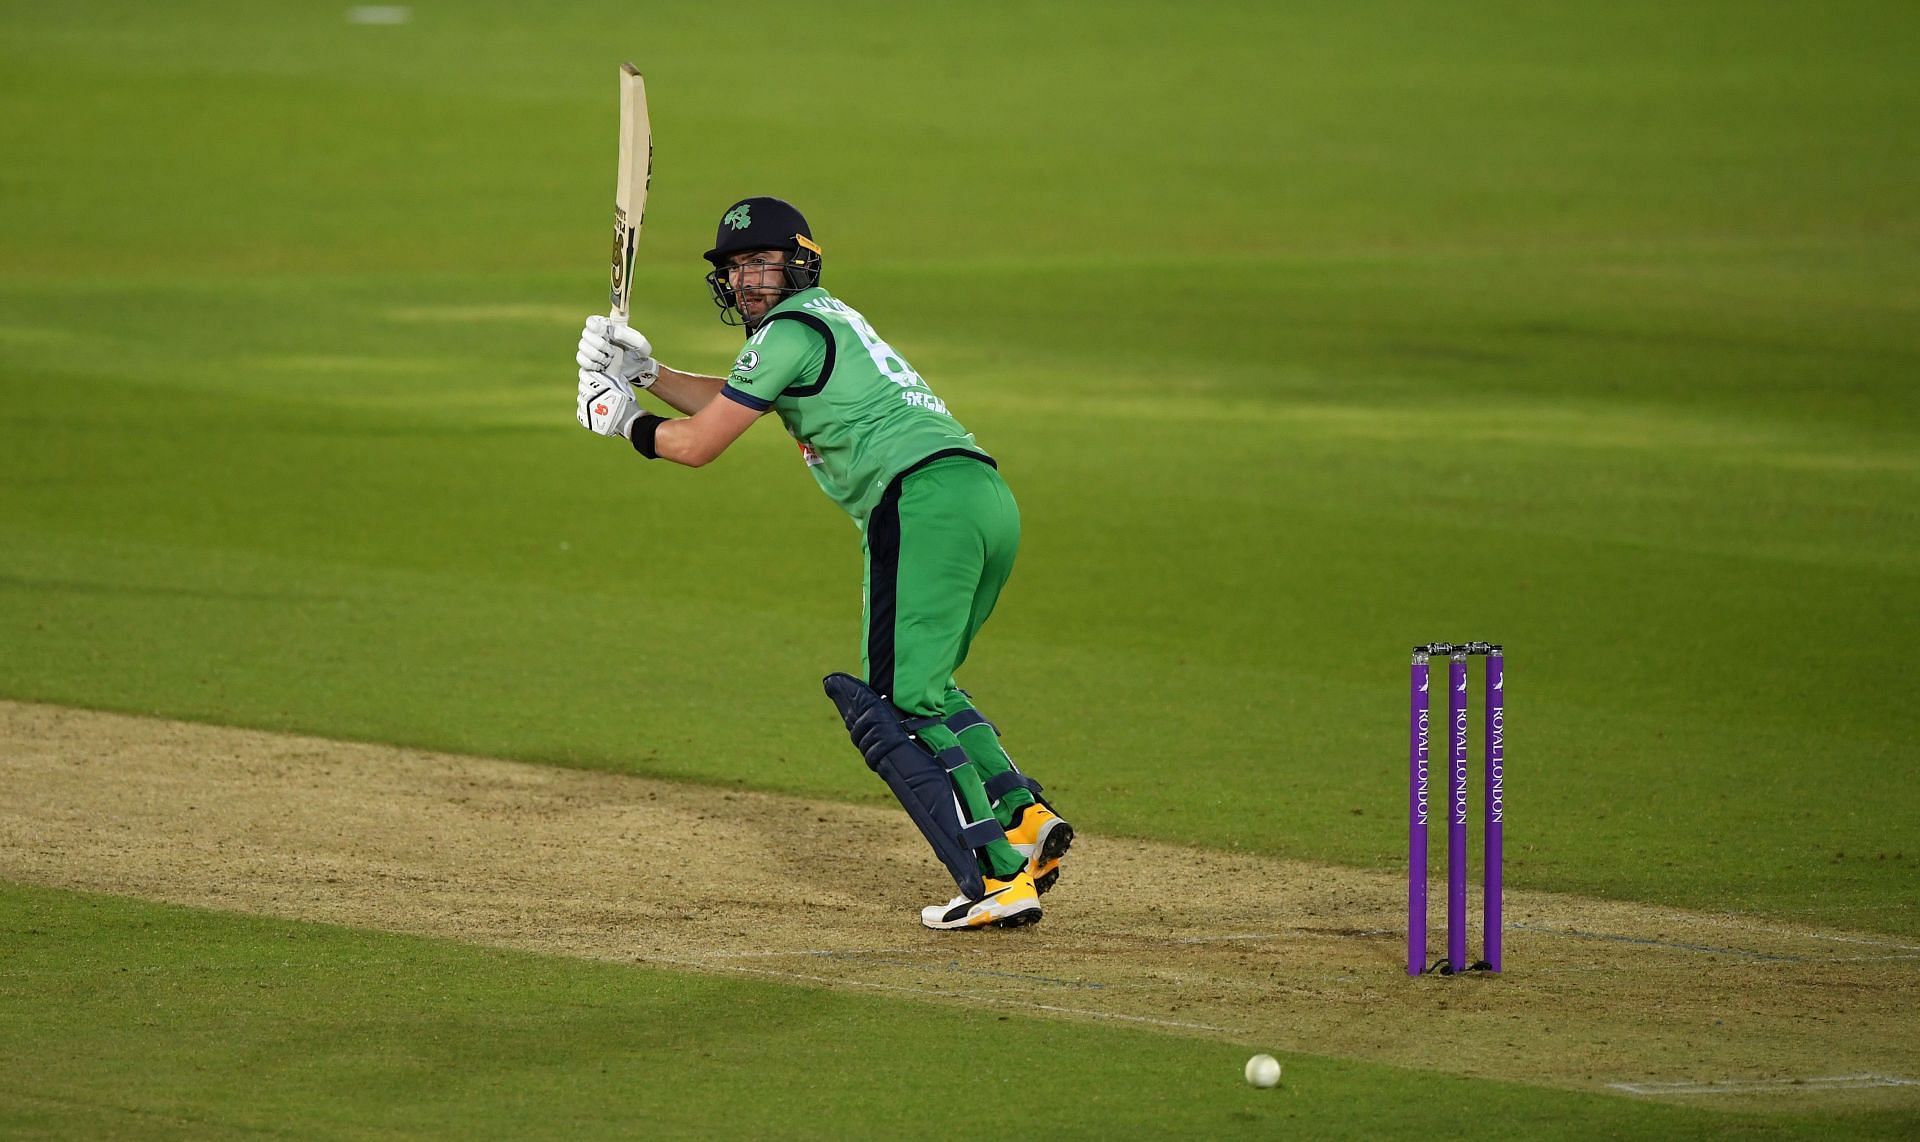 Andrew Balbirnie in action in England vs Ireland - 3rd One Day International: Royal London Series